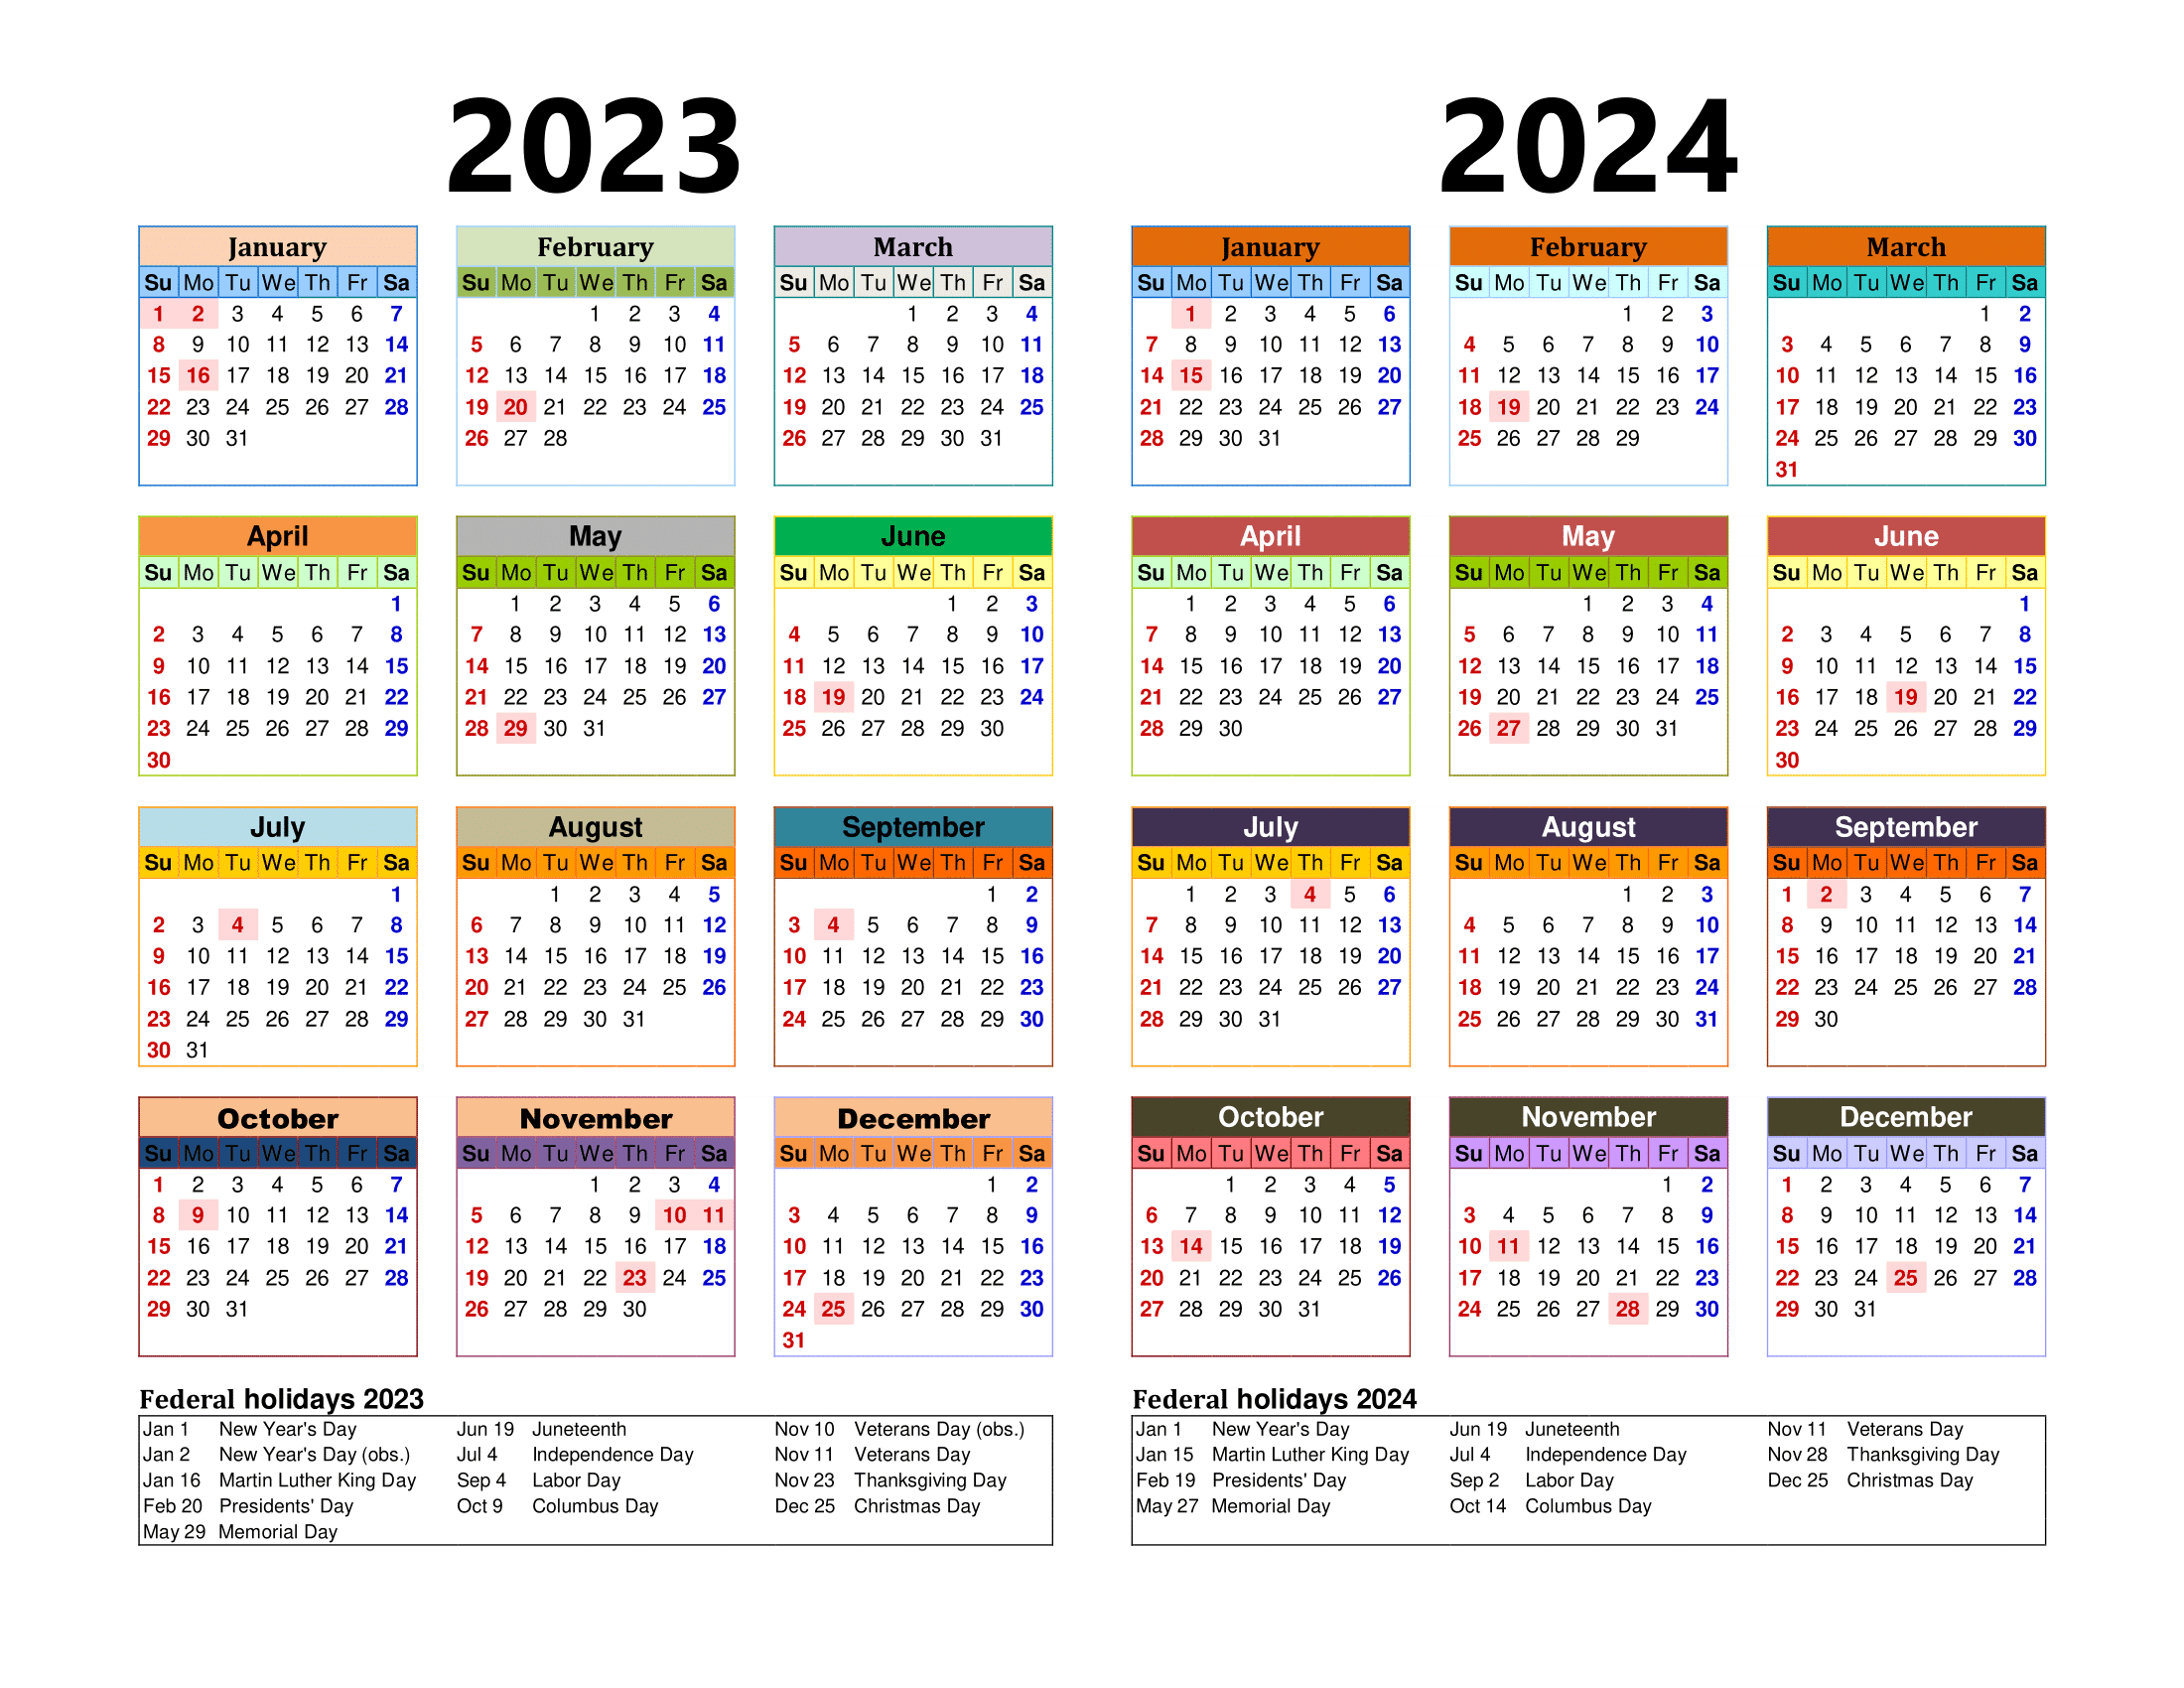 Free Printable Two Year Calendar Templates For 2023 And 2024 In Pdf | 2023 And 2024 Yearly Calendar